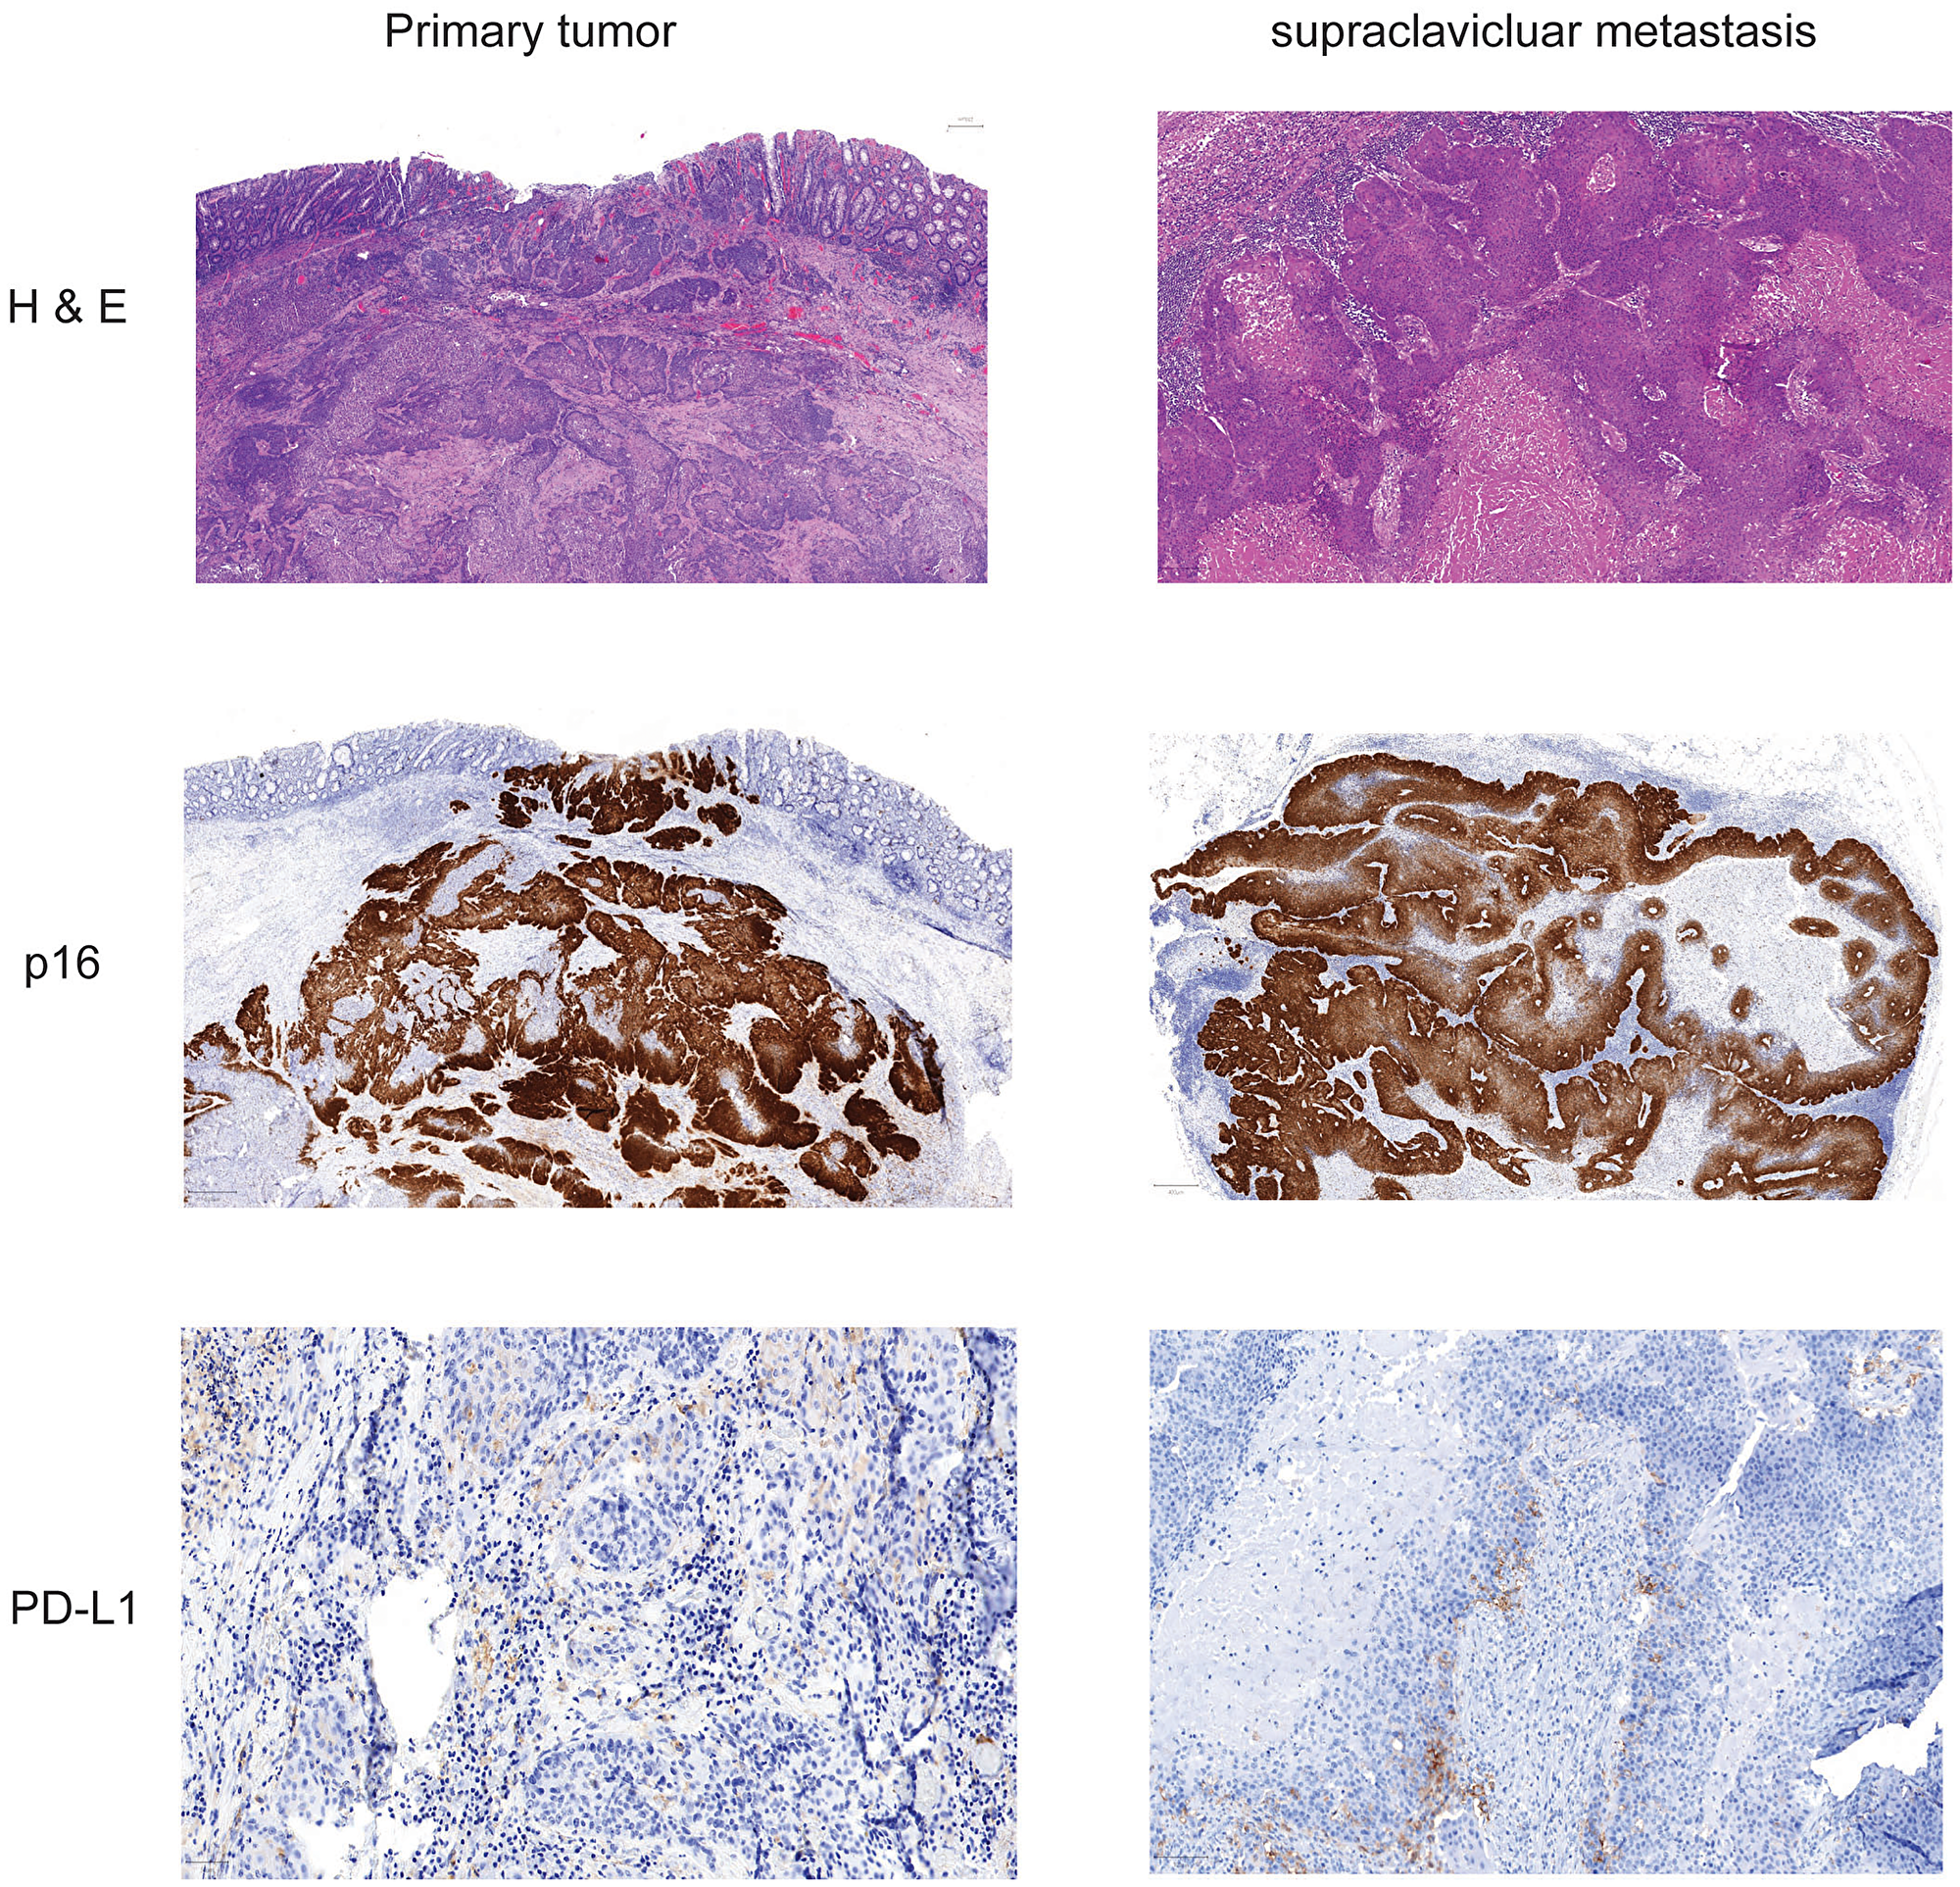 Histochemistry and immunohistochemistry of tumor tissue of primary cancer and lymph node metastasis.